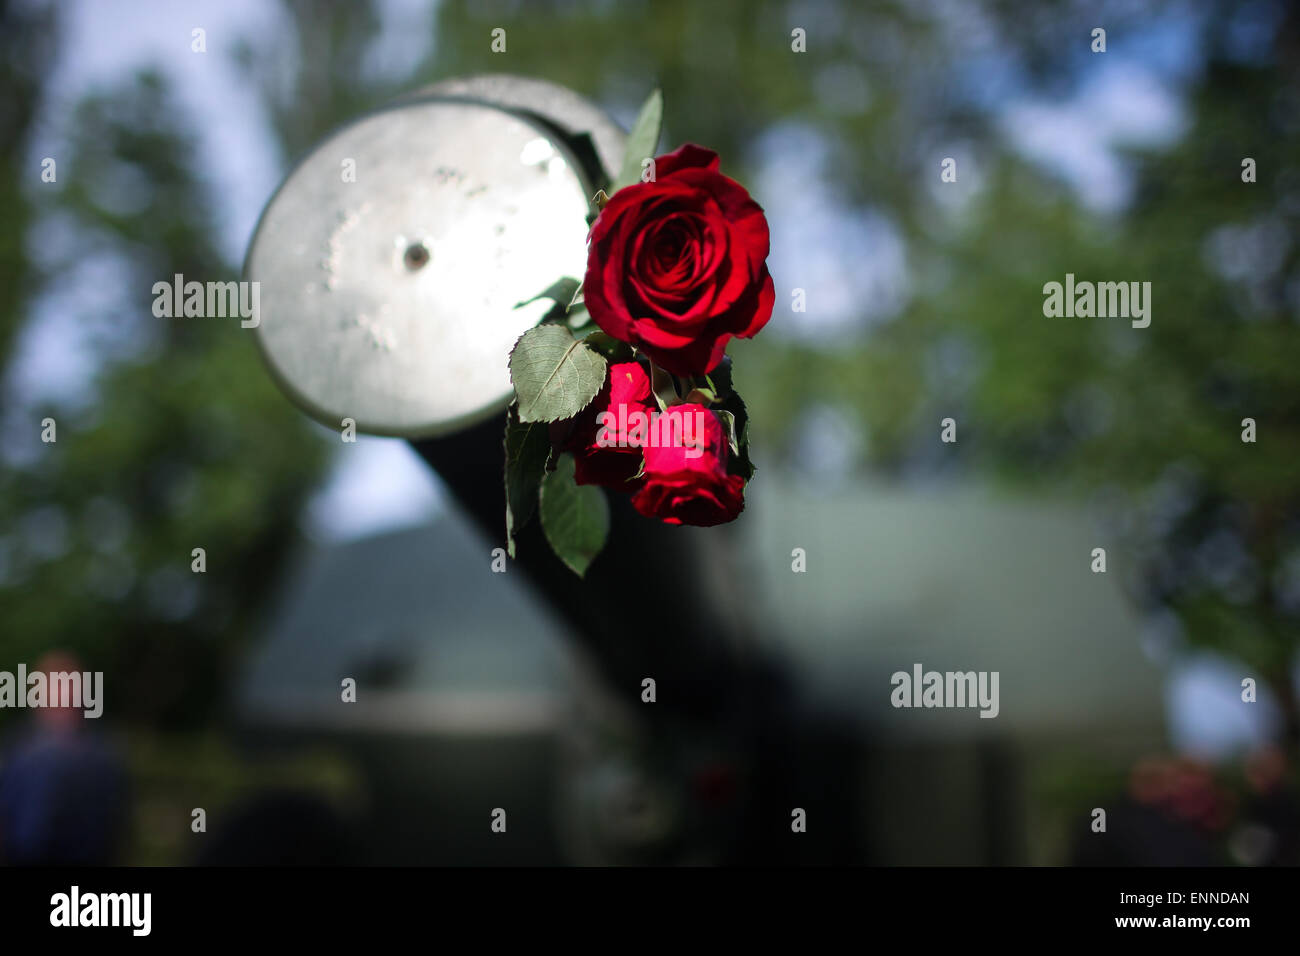 Berlin, Germany. 8th May, 2015. Roses are seen inside a howitzwer model during a memorial ceremony marking the 70th anniversary of the end of World War II at the German-Russian Museum in Berlin, Germany, May 8, 2015. © Zhang Fan/Xinhua/Alamy Live News Stock Photo